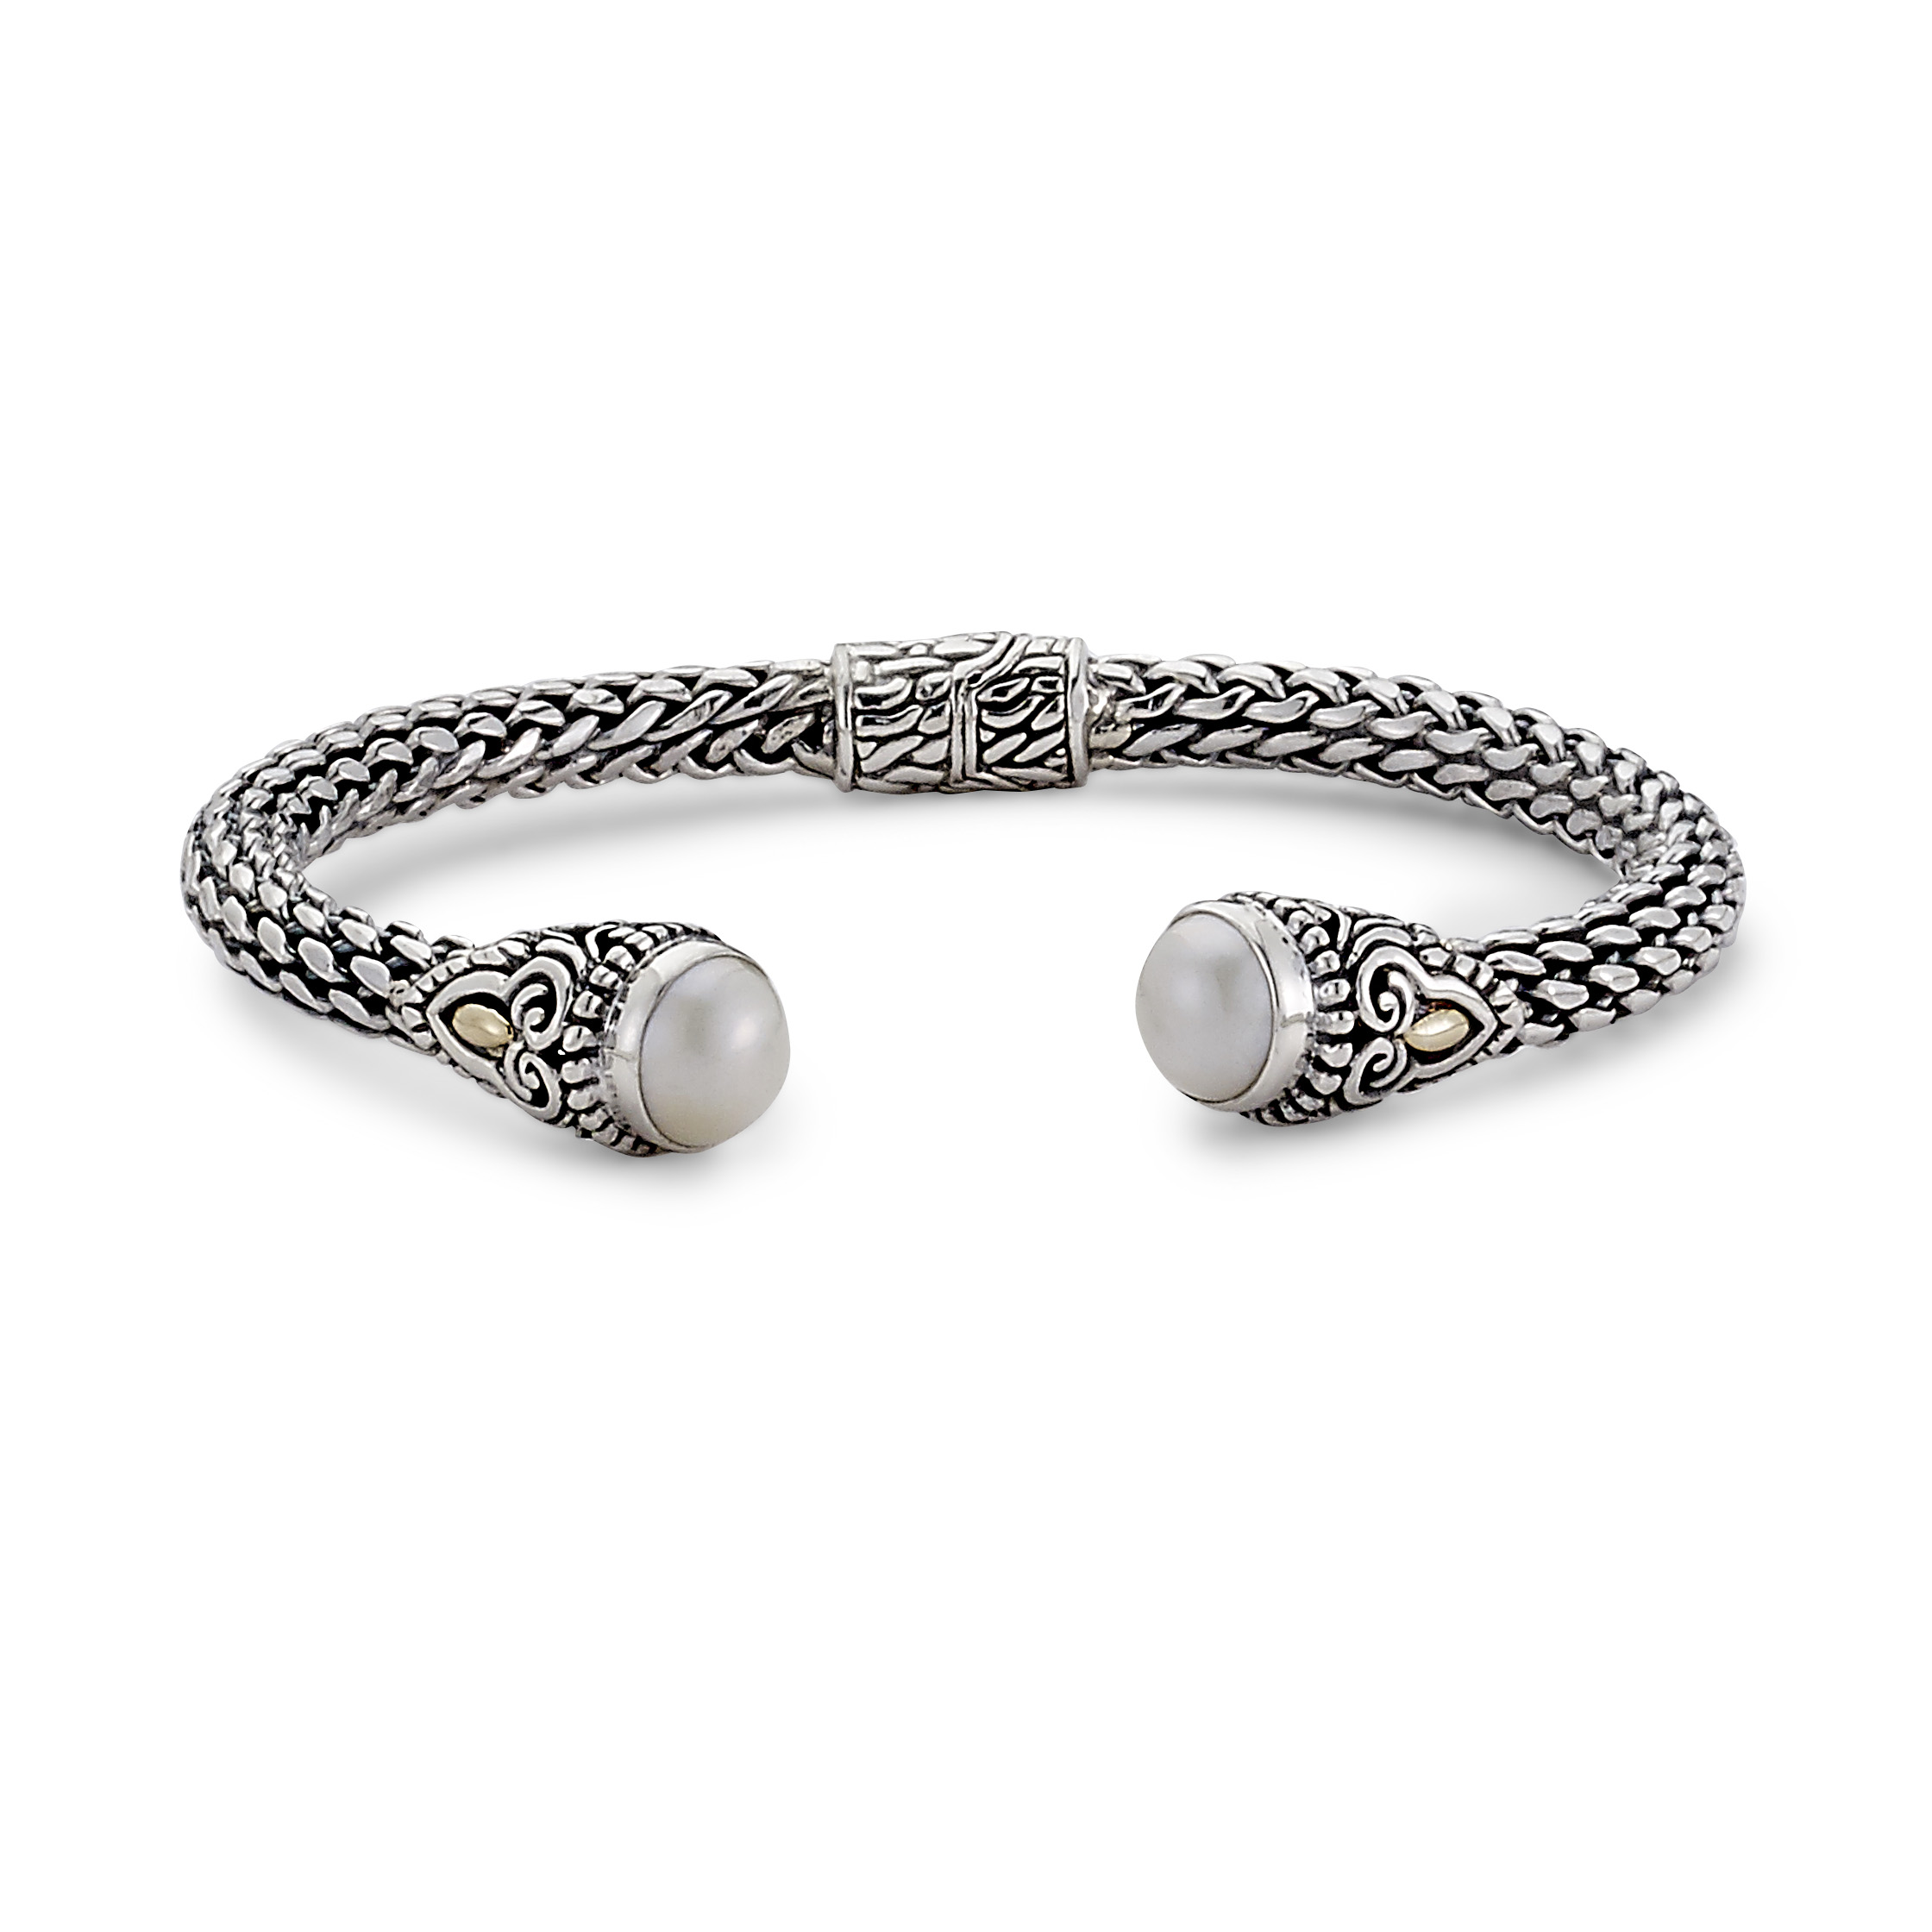 Woven Bangle with Pearl Endcaps